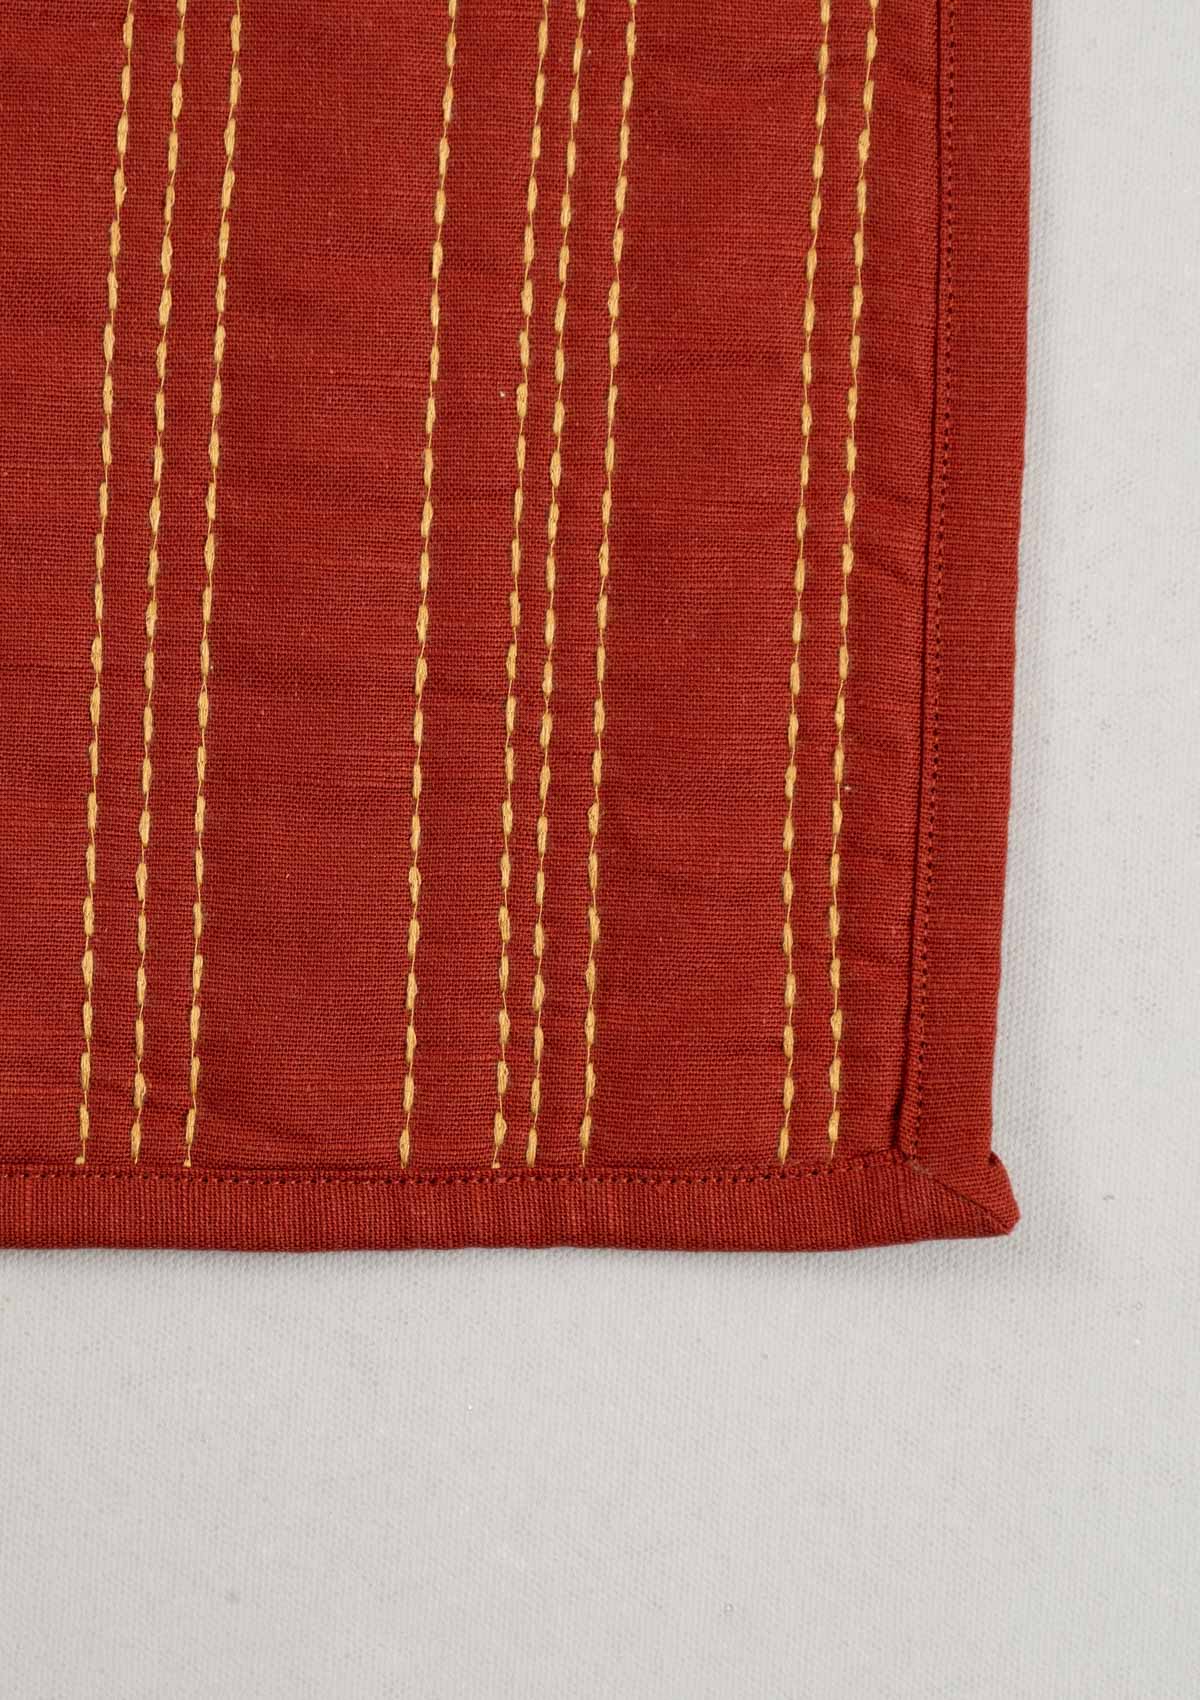 Brick Red Embroidered Cotton Placemat - Red